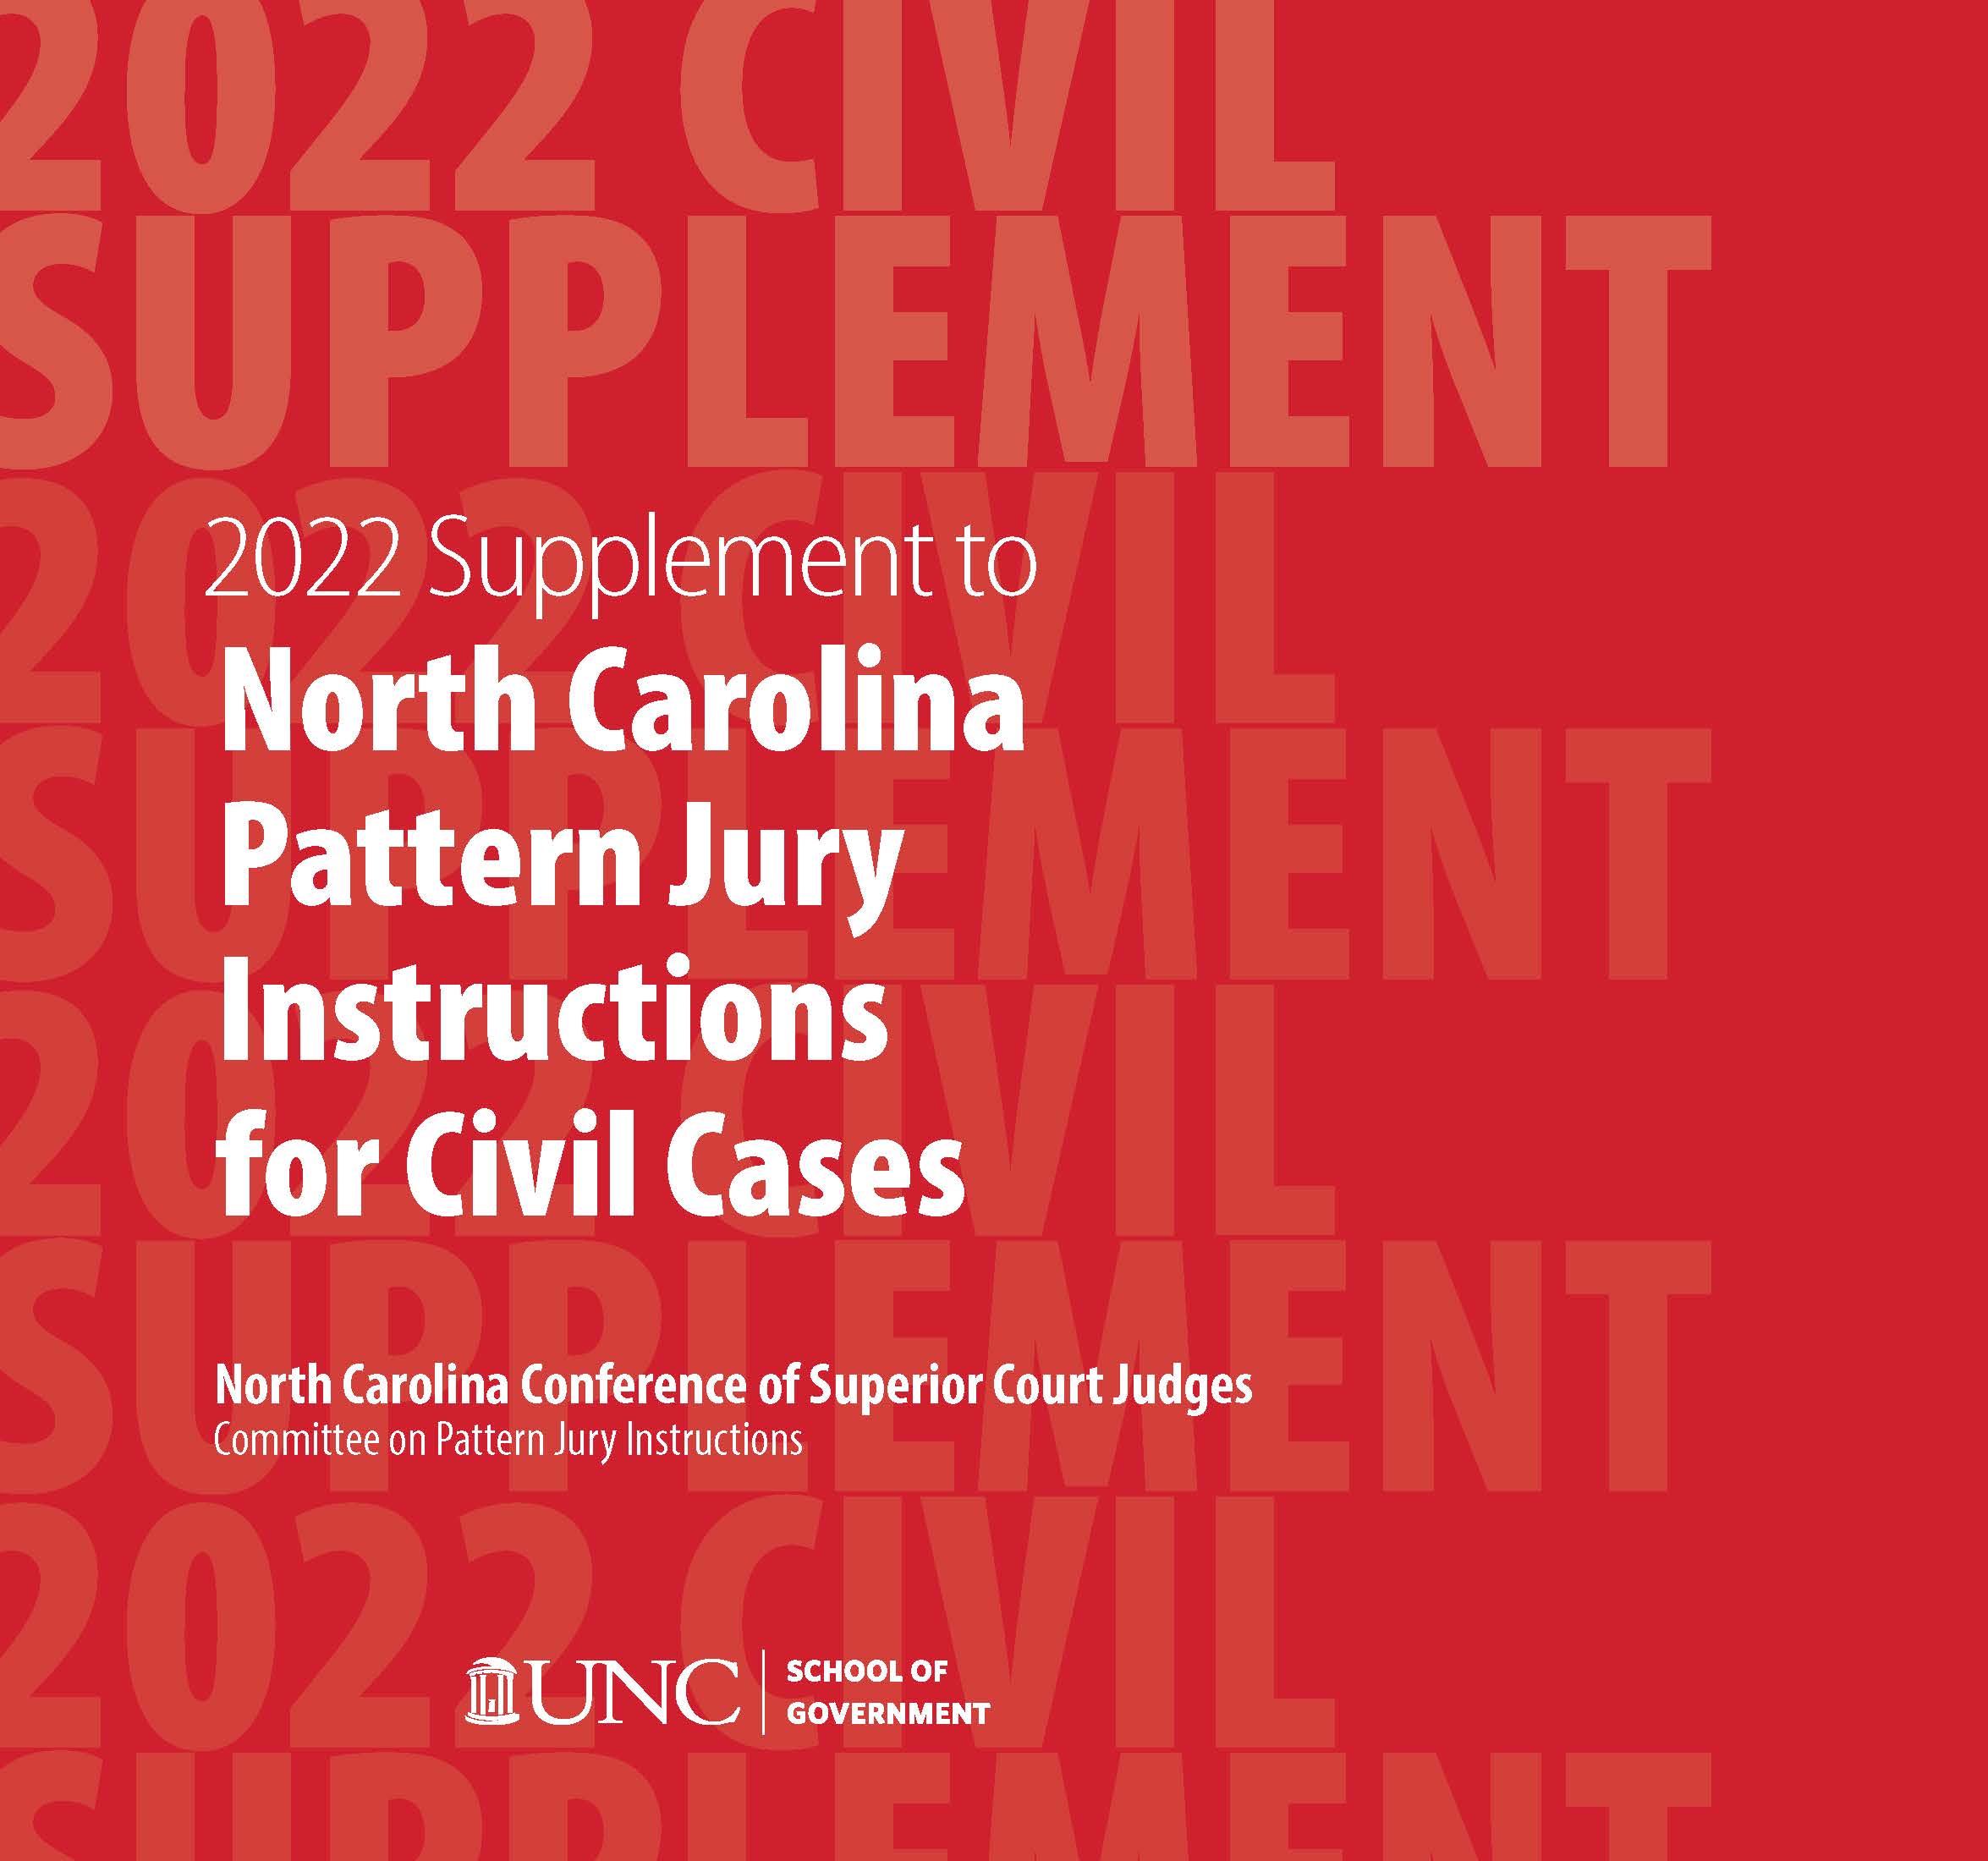 Cover image for June 2022 Supplement to North Carolina Pattern Jury Instructions for Civil Cases